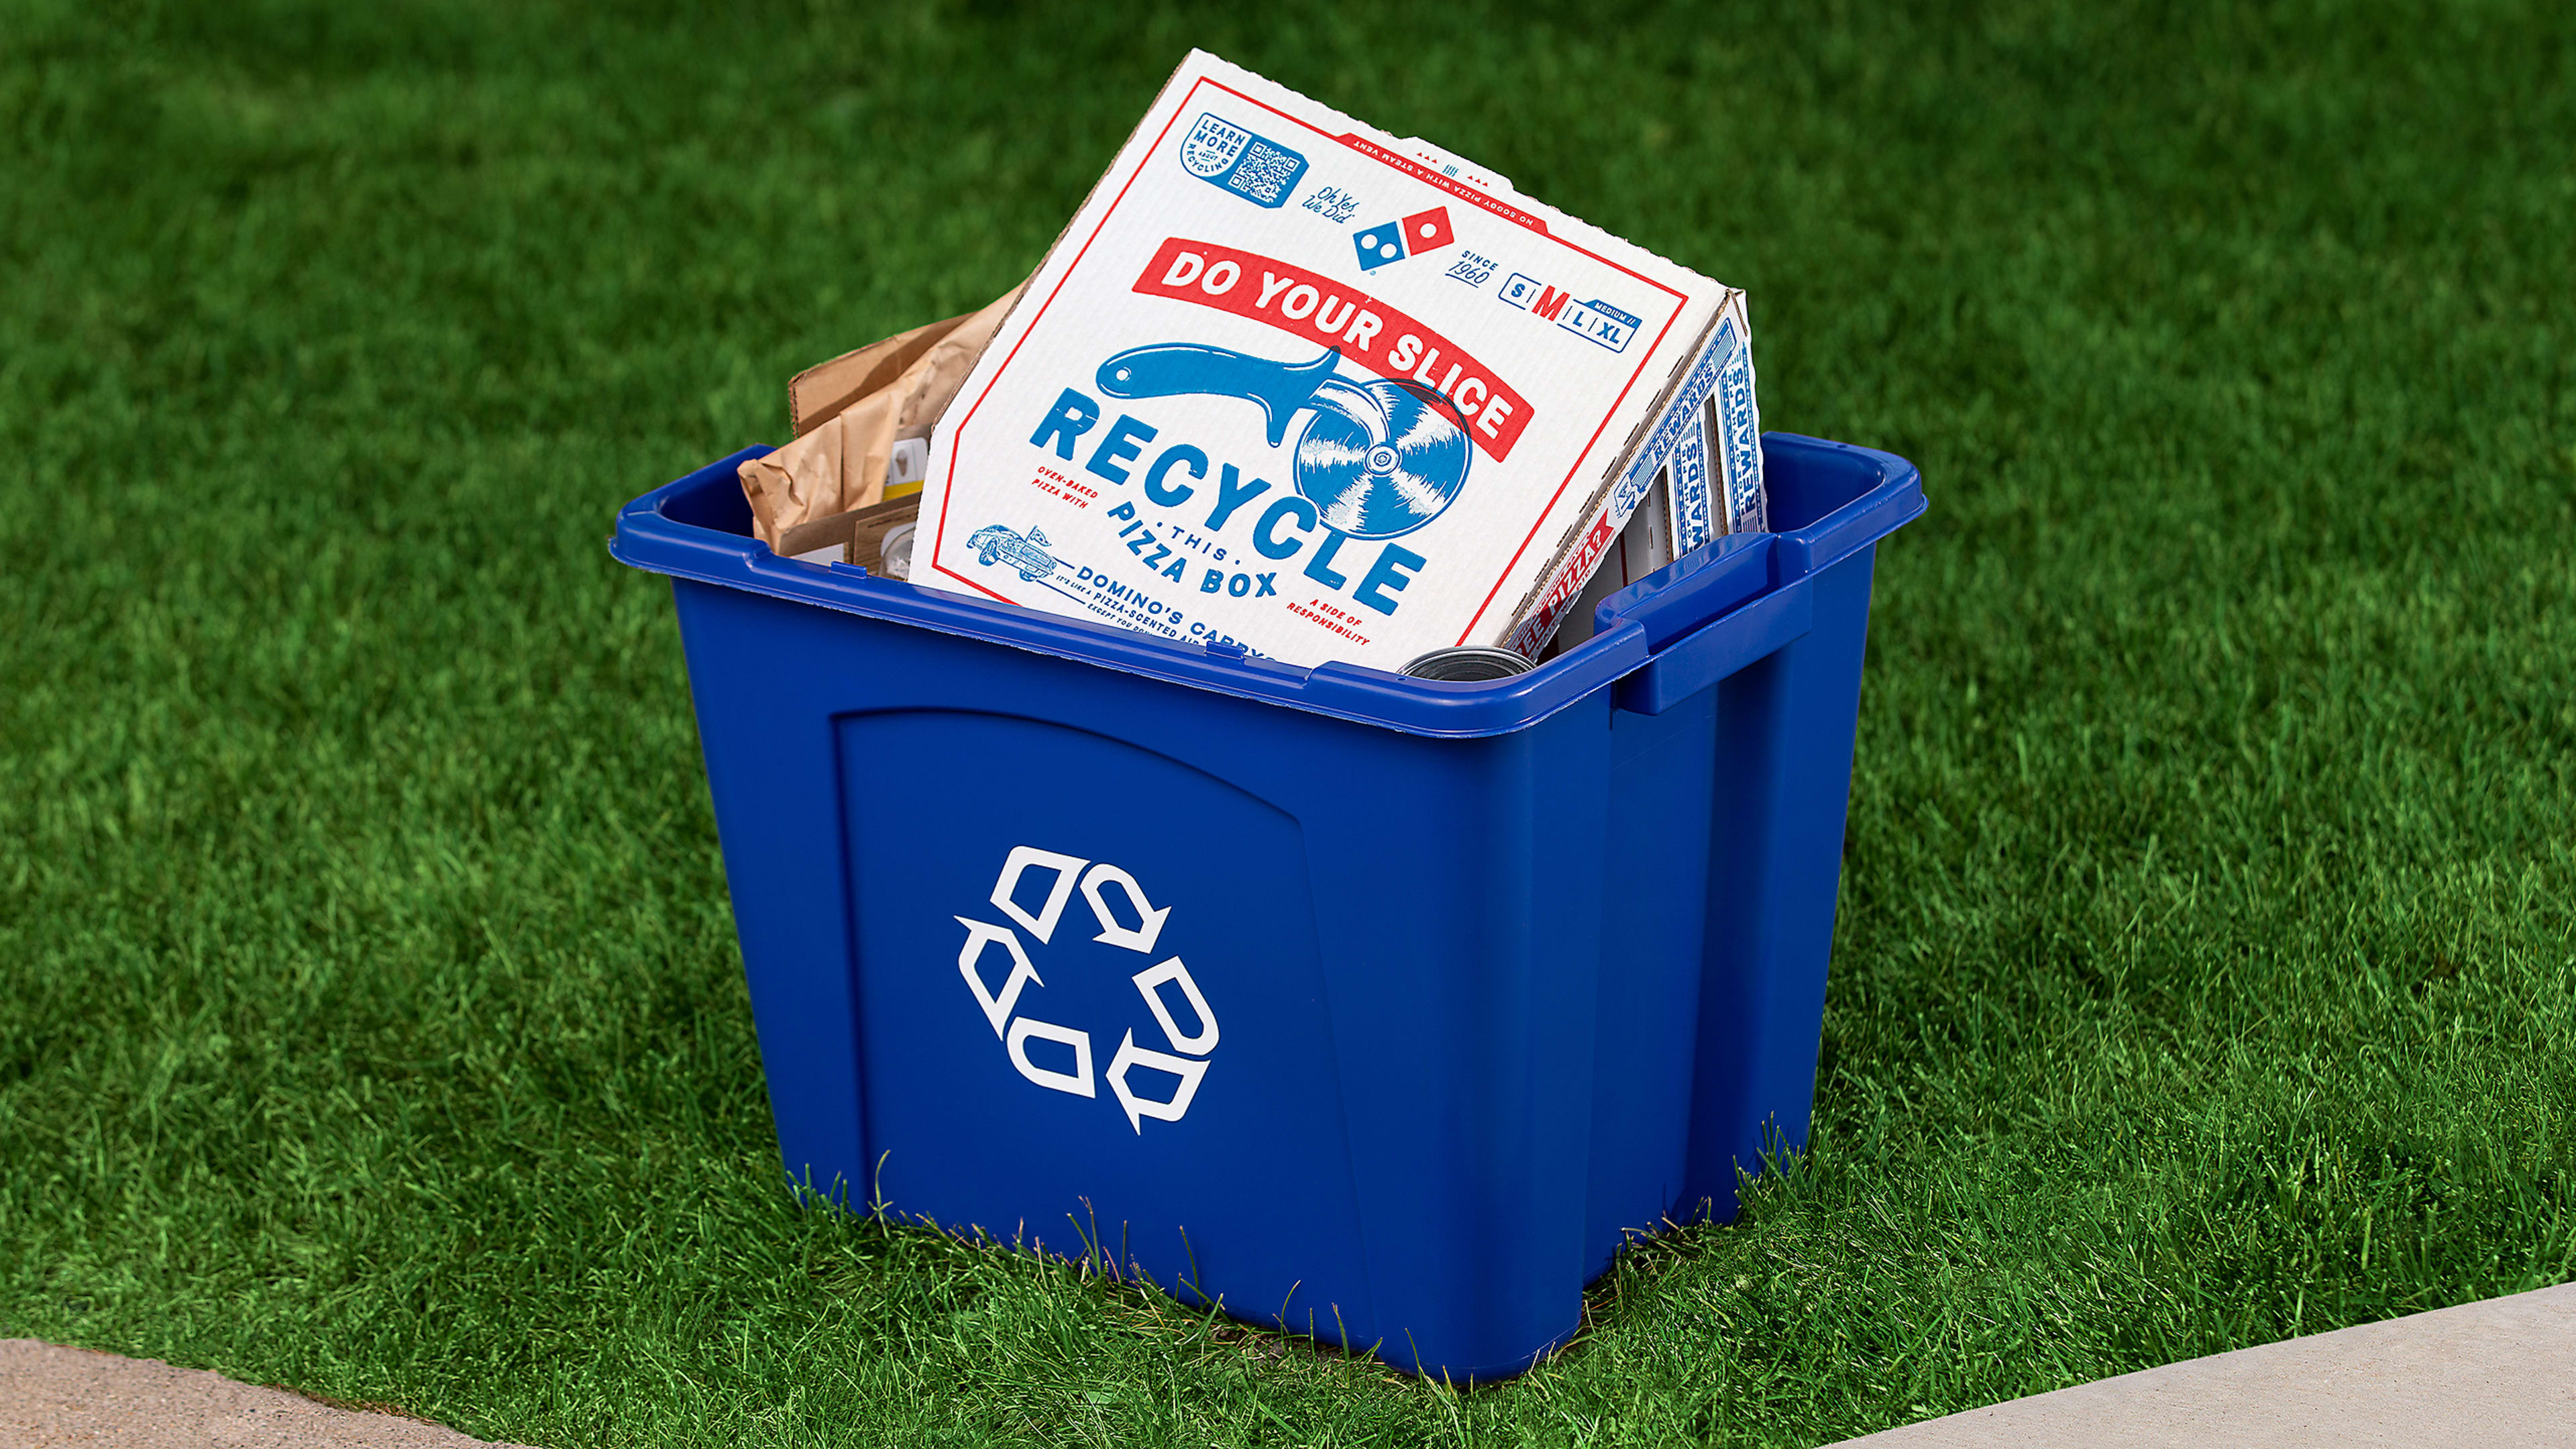 This new Domino’s box settles the argument of whether or not you can recycle it